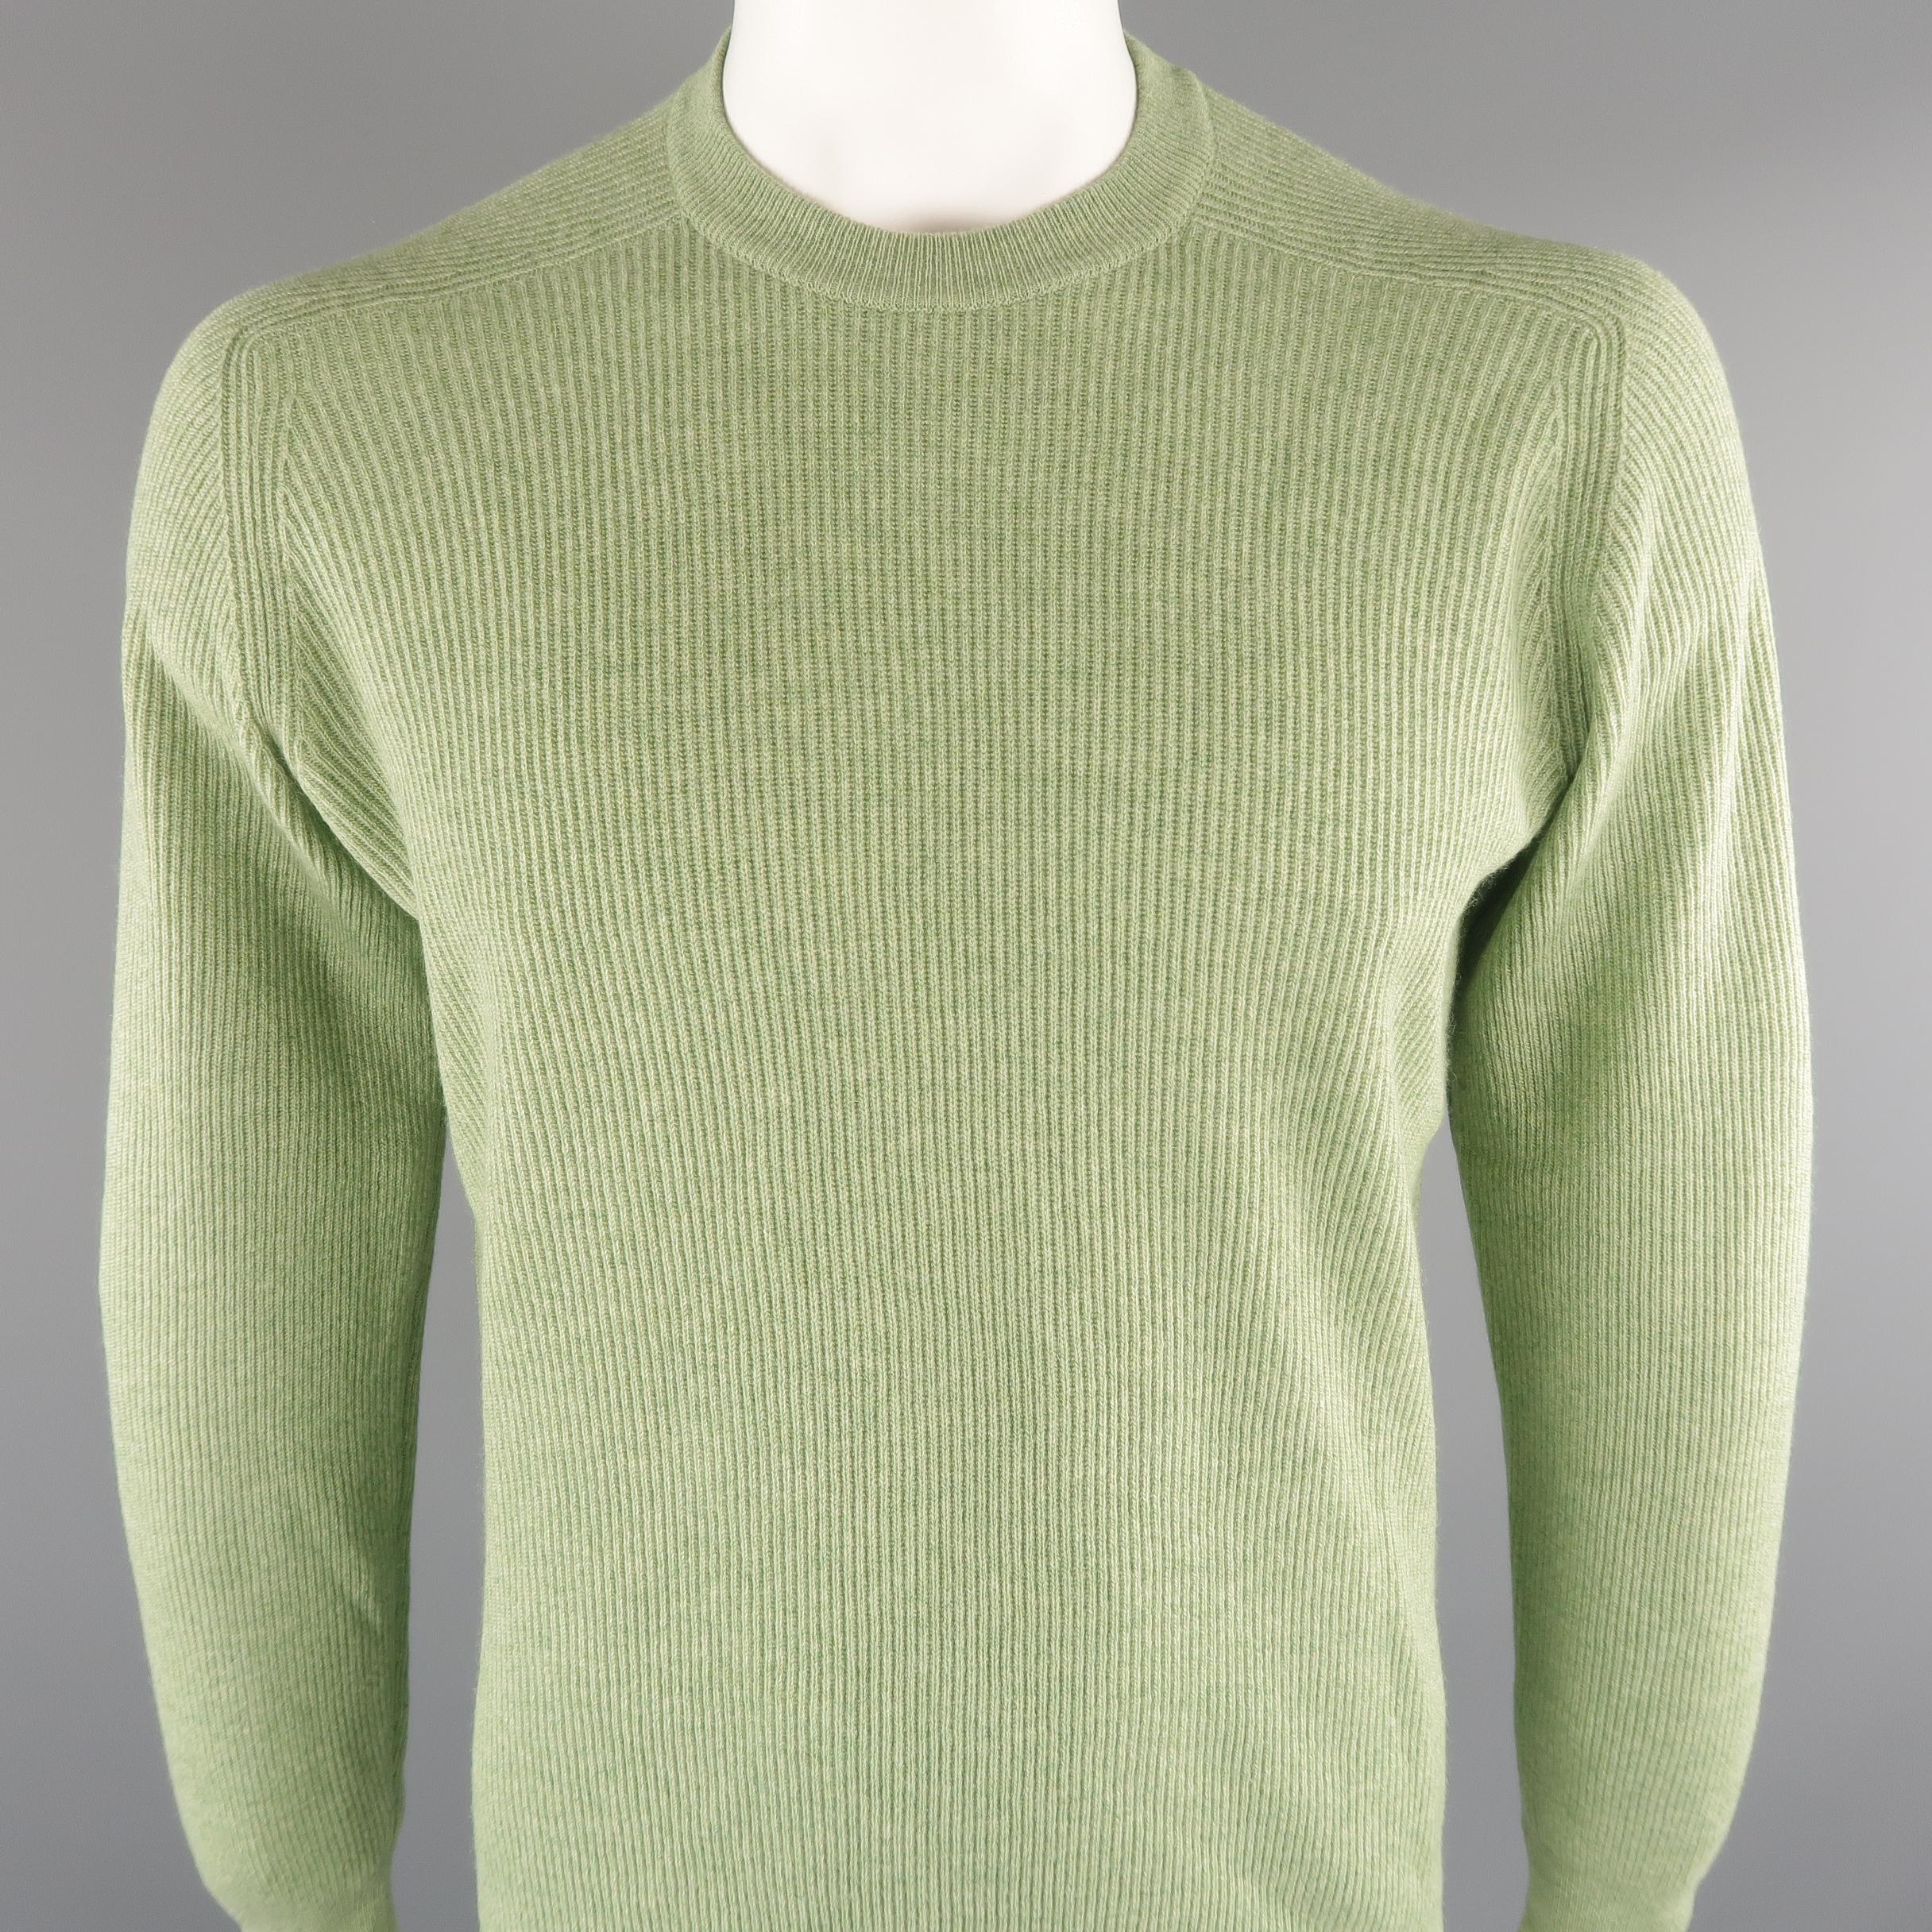 BRUNELLO CUCINELLI sweater comes in 100% cashmere in a green tone, ribbed knit, with a crewneck and ribbed cuff and waistband. Made in Italy.
 
New with Tags.
Marked: 54 IT
 
Measurements:
 
Shoulder: 17.5 in.
Chest: 46 in.
Sleeve: 26.5 in.
Length: